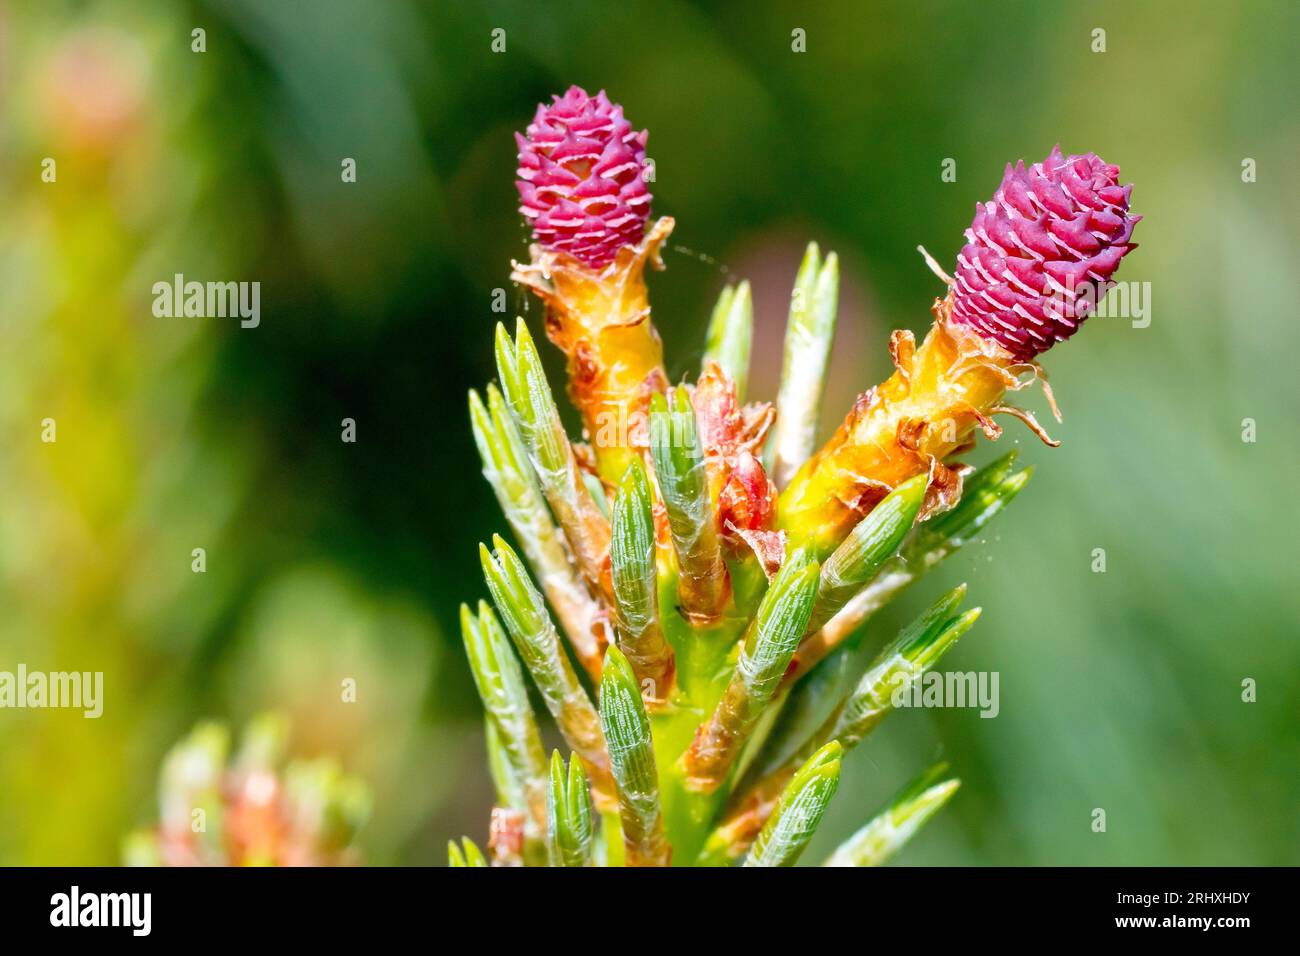 Scot's Pine (pinus sylvestris), close up of the small pink female flowers of the common evergreen tree. Stock Photo